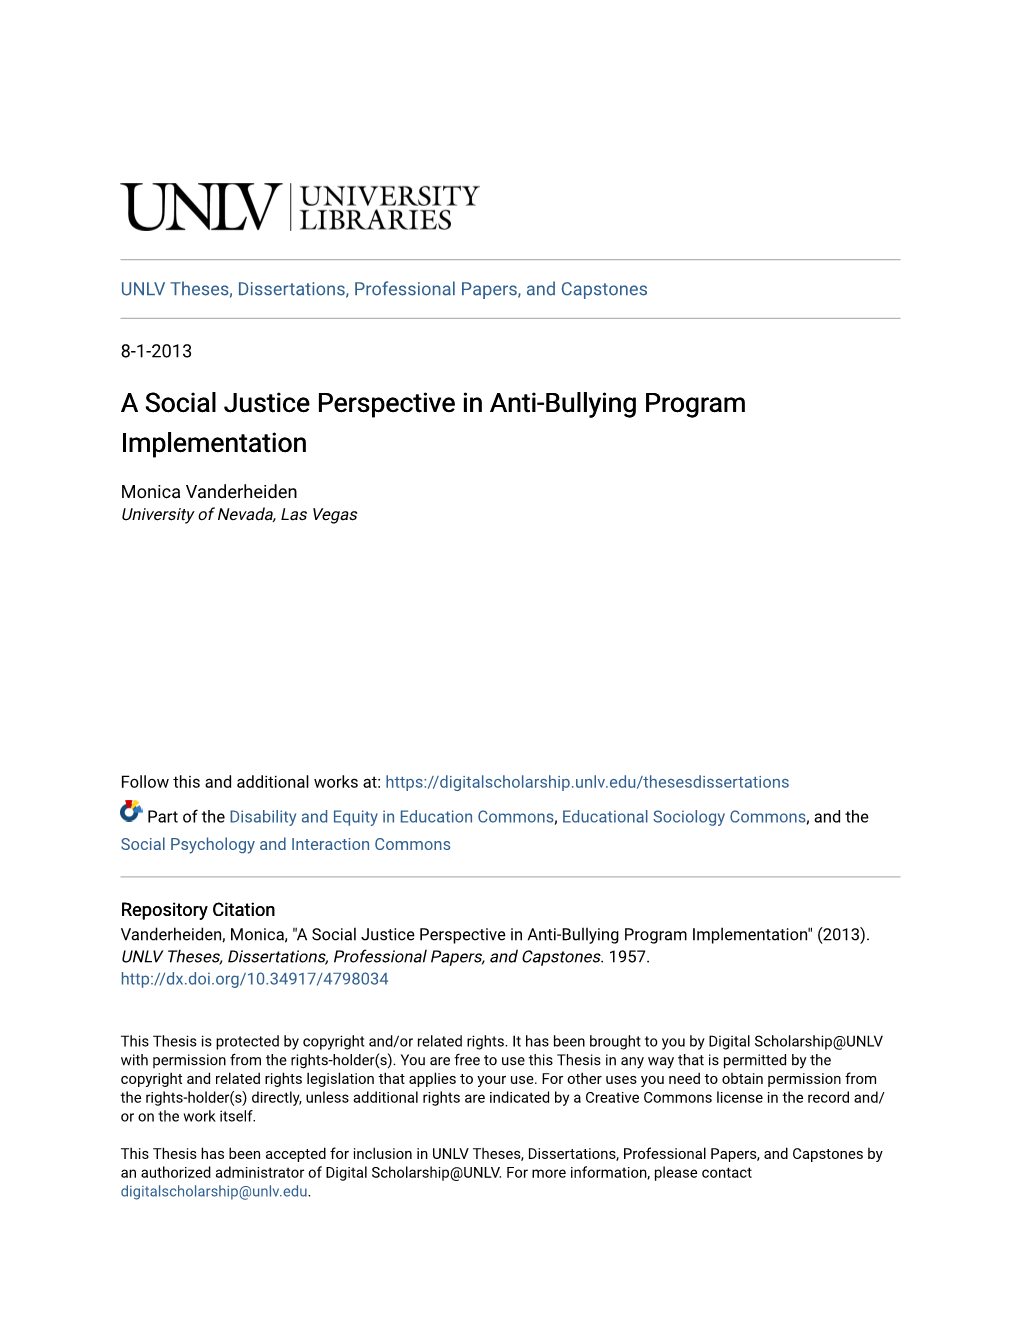 A Social Justice Perspective in Anti-Bullying Program Implementation